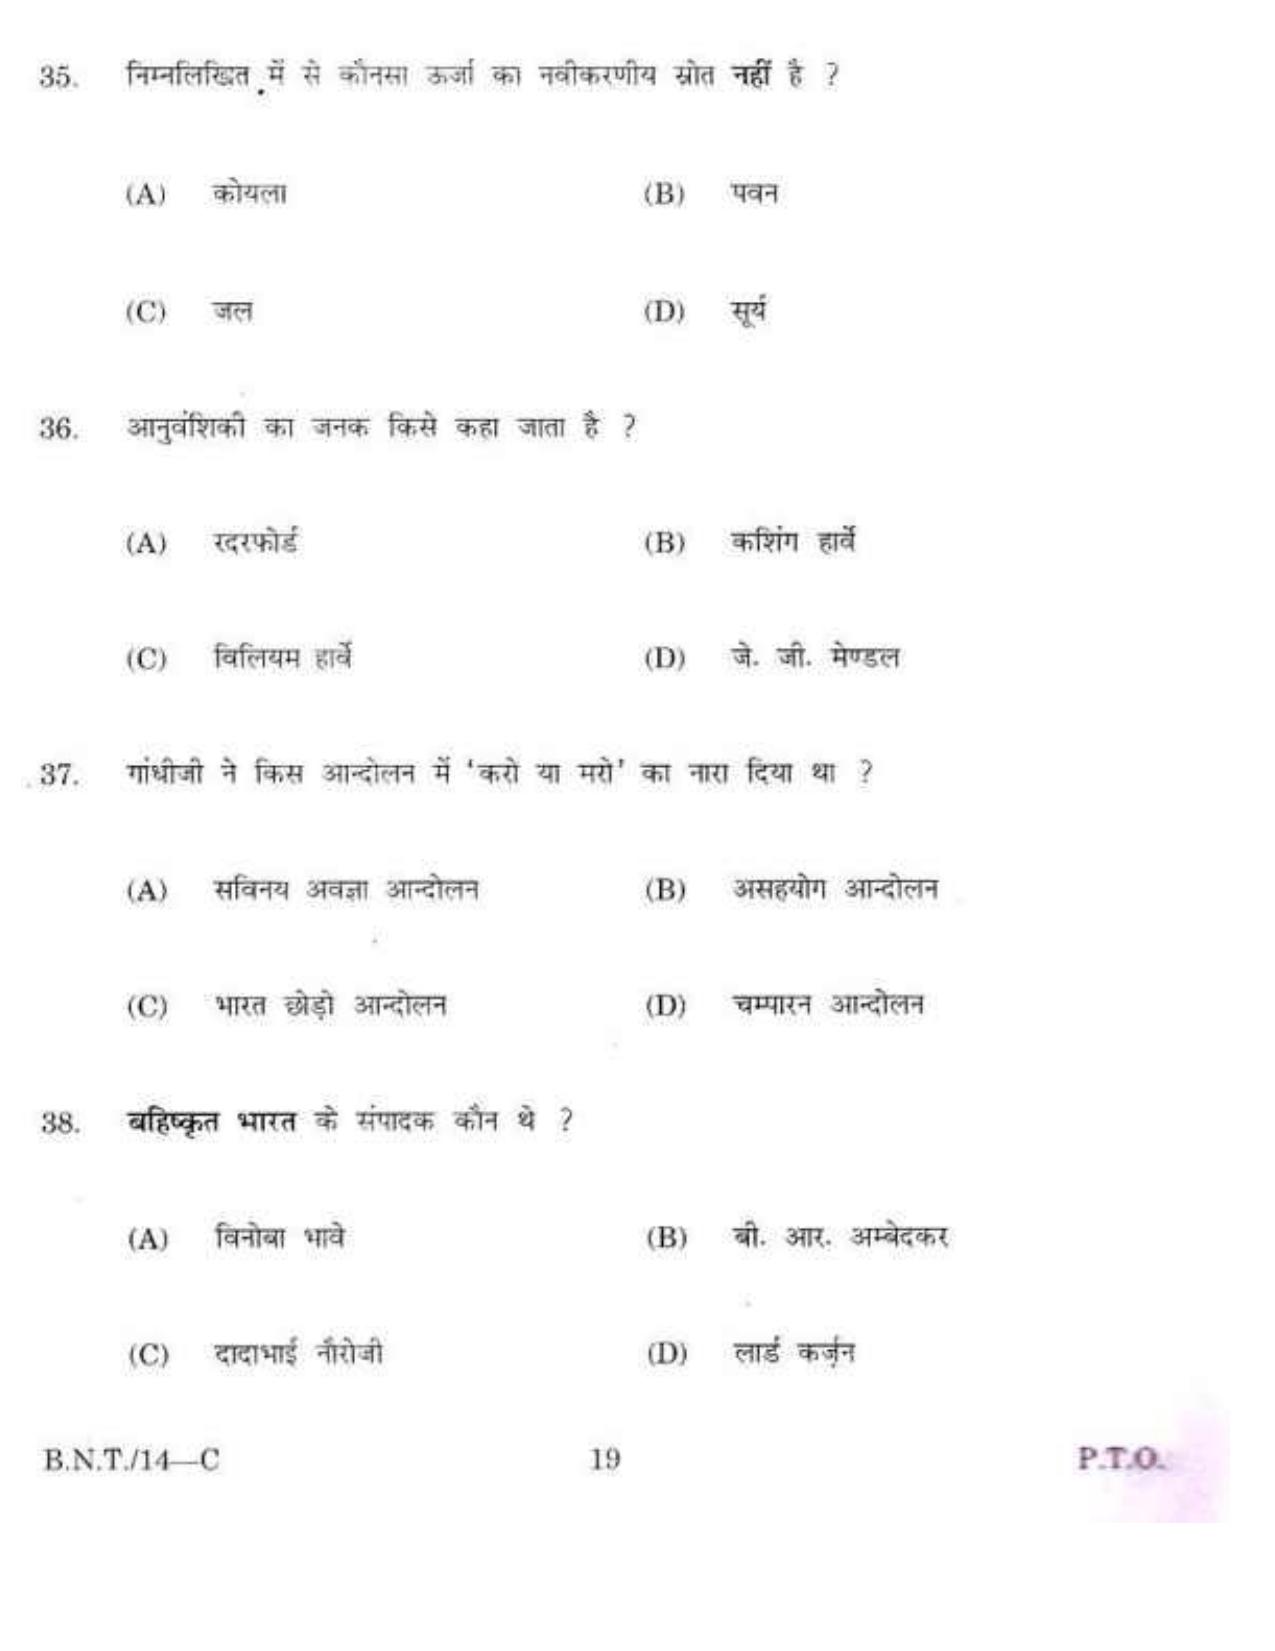 BSMFC Recovery Agent Old Question Papers for General Knowledge - Page 19